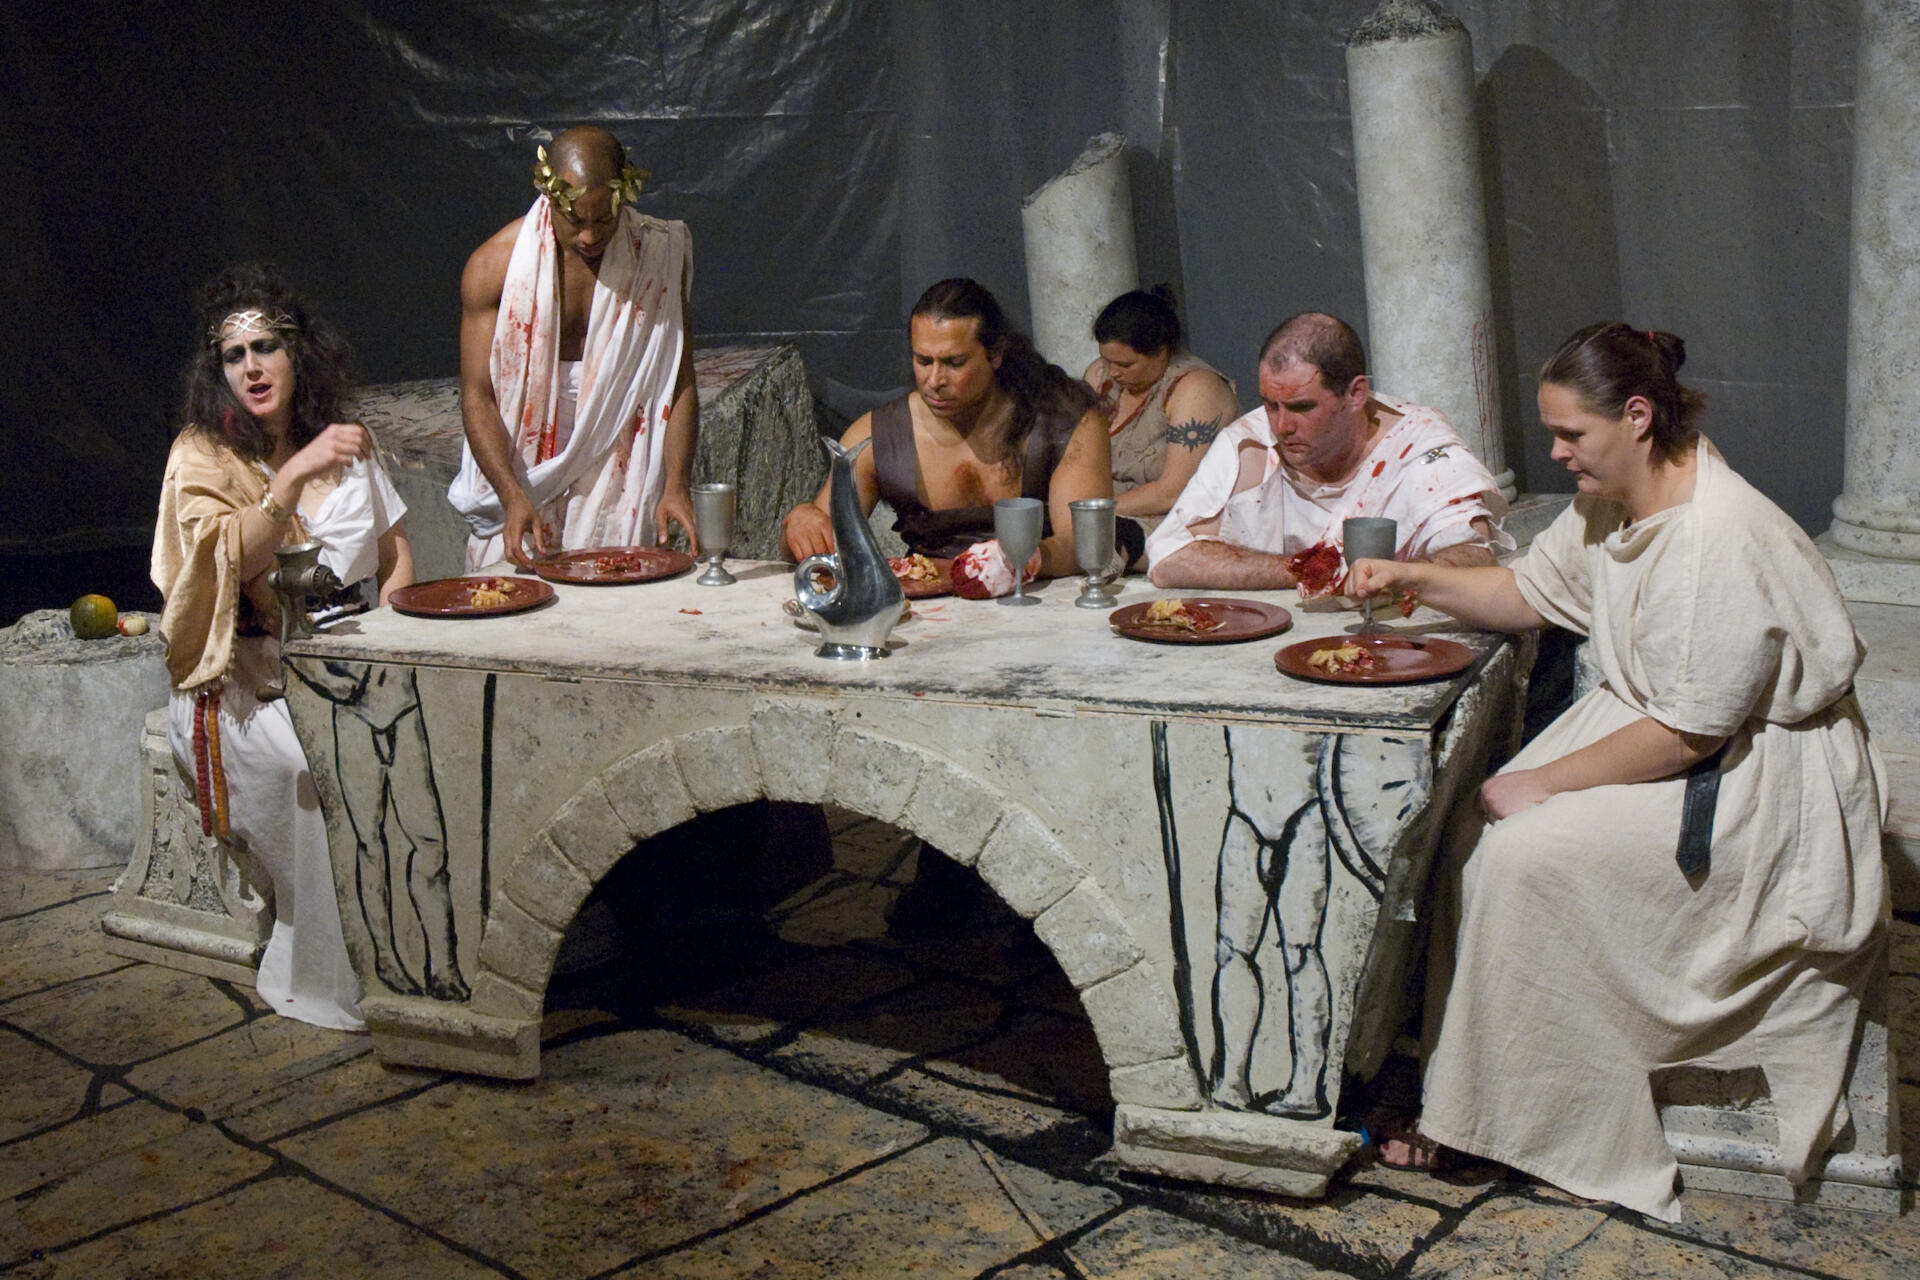 Erin Day, Lamar Lewis, Johnny Patchamatla, Erin Enns Hauk, Sam Hagen and Jessica Stepka in Hard Bard Titus Andronicus - 2009